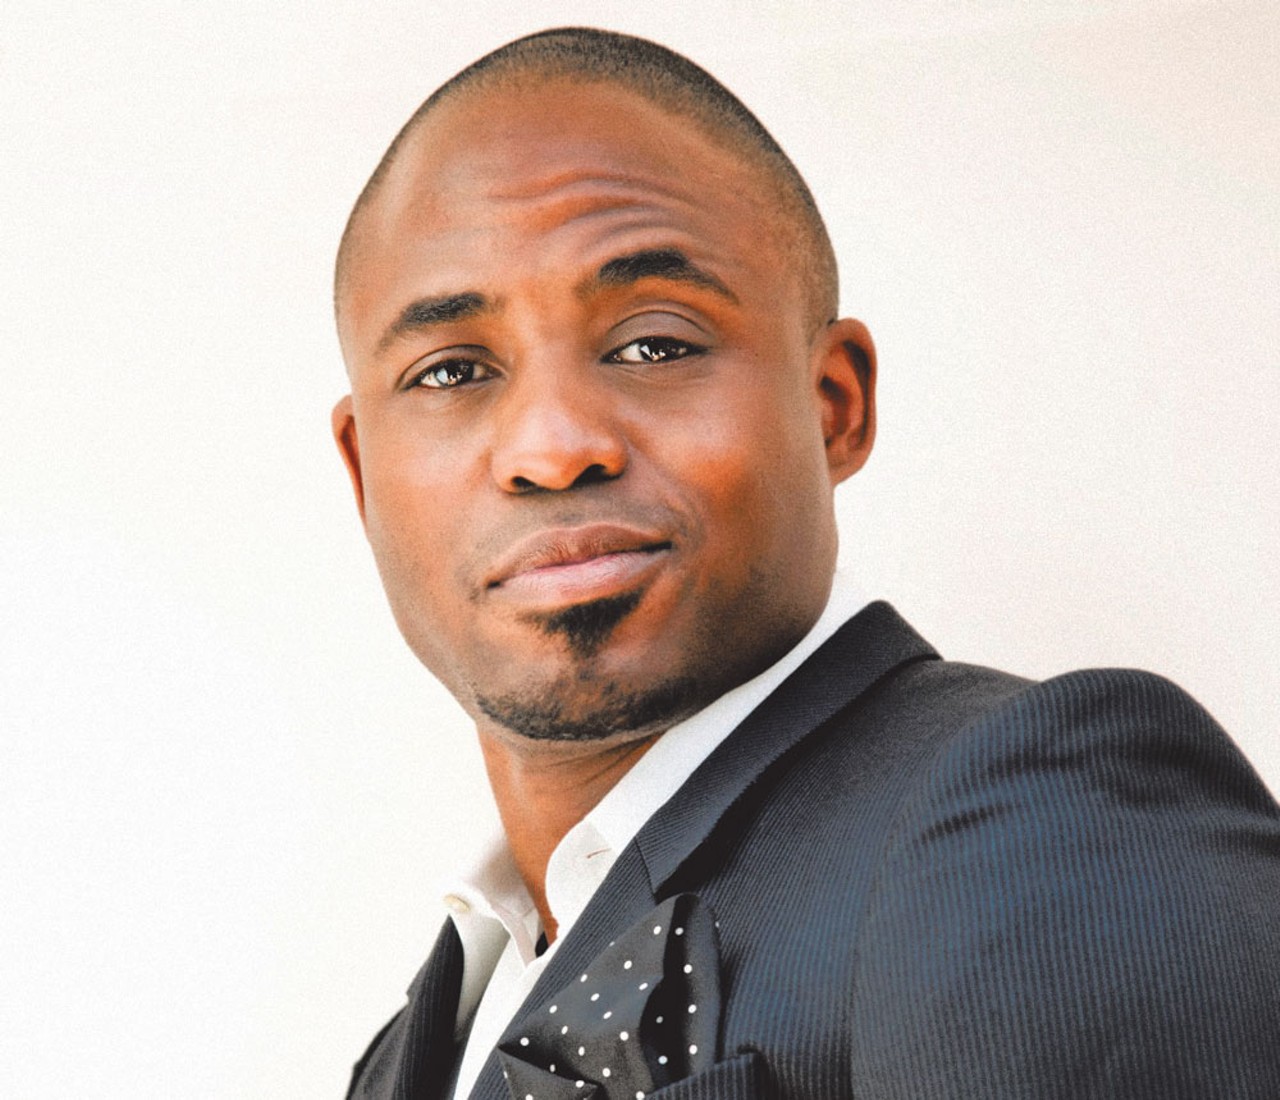 Oct. 12   
Wayne Brady
8 p.m. at the Walt Disney Theater, Dr. Phillips Center for the Performing Arts, drphillipscenter.org, $39.50-$65   
The most successful product of SAK Comedy Lab's improv comedy troupe returns to Orlando for a homecoming date on his current tour. Brady is best known as a regular on both the U.K. and U.S. versions of improv show Whose Line Is It Anyway?, but his r&eacute;sum&eacute; includes everything from talk-show host to soap opera star to Broadway sensation. Welcome home, Wayne.   
Photo courtesy Dr. Phillips Center